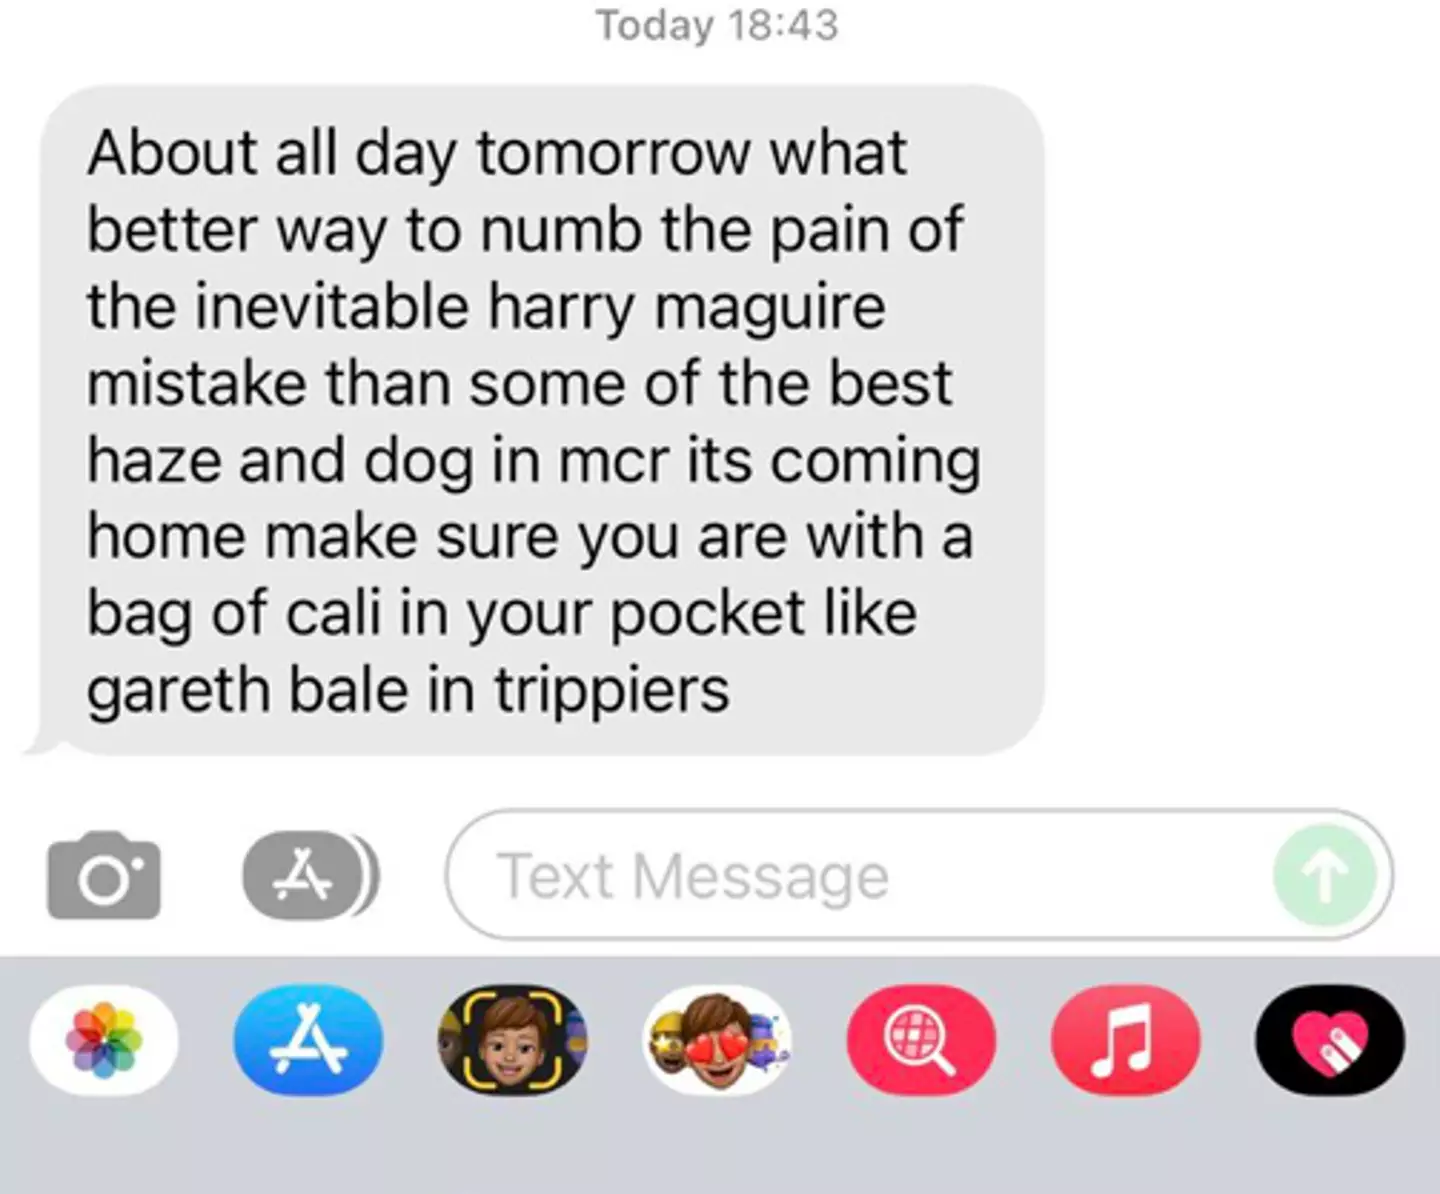 UK drug dealers are sending their customers 'World Cup discount' texts and they've gone viral on social media.